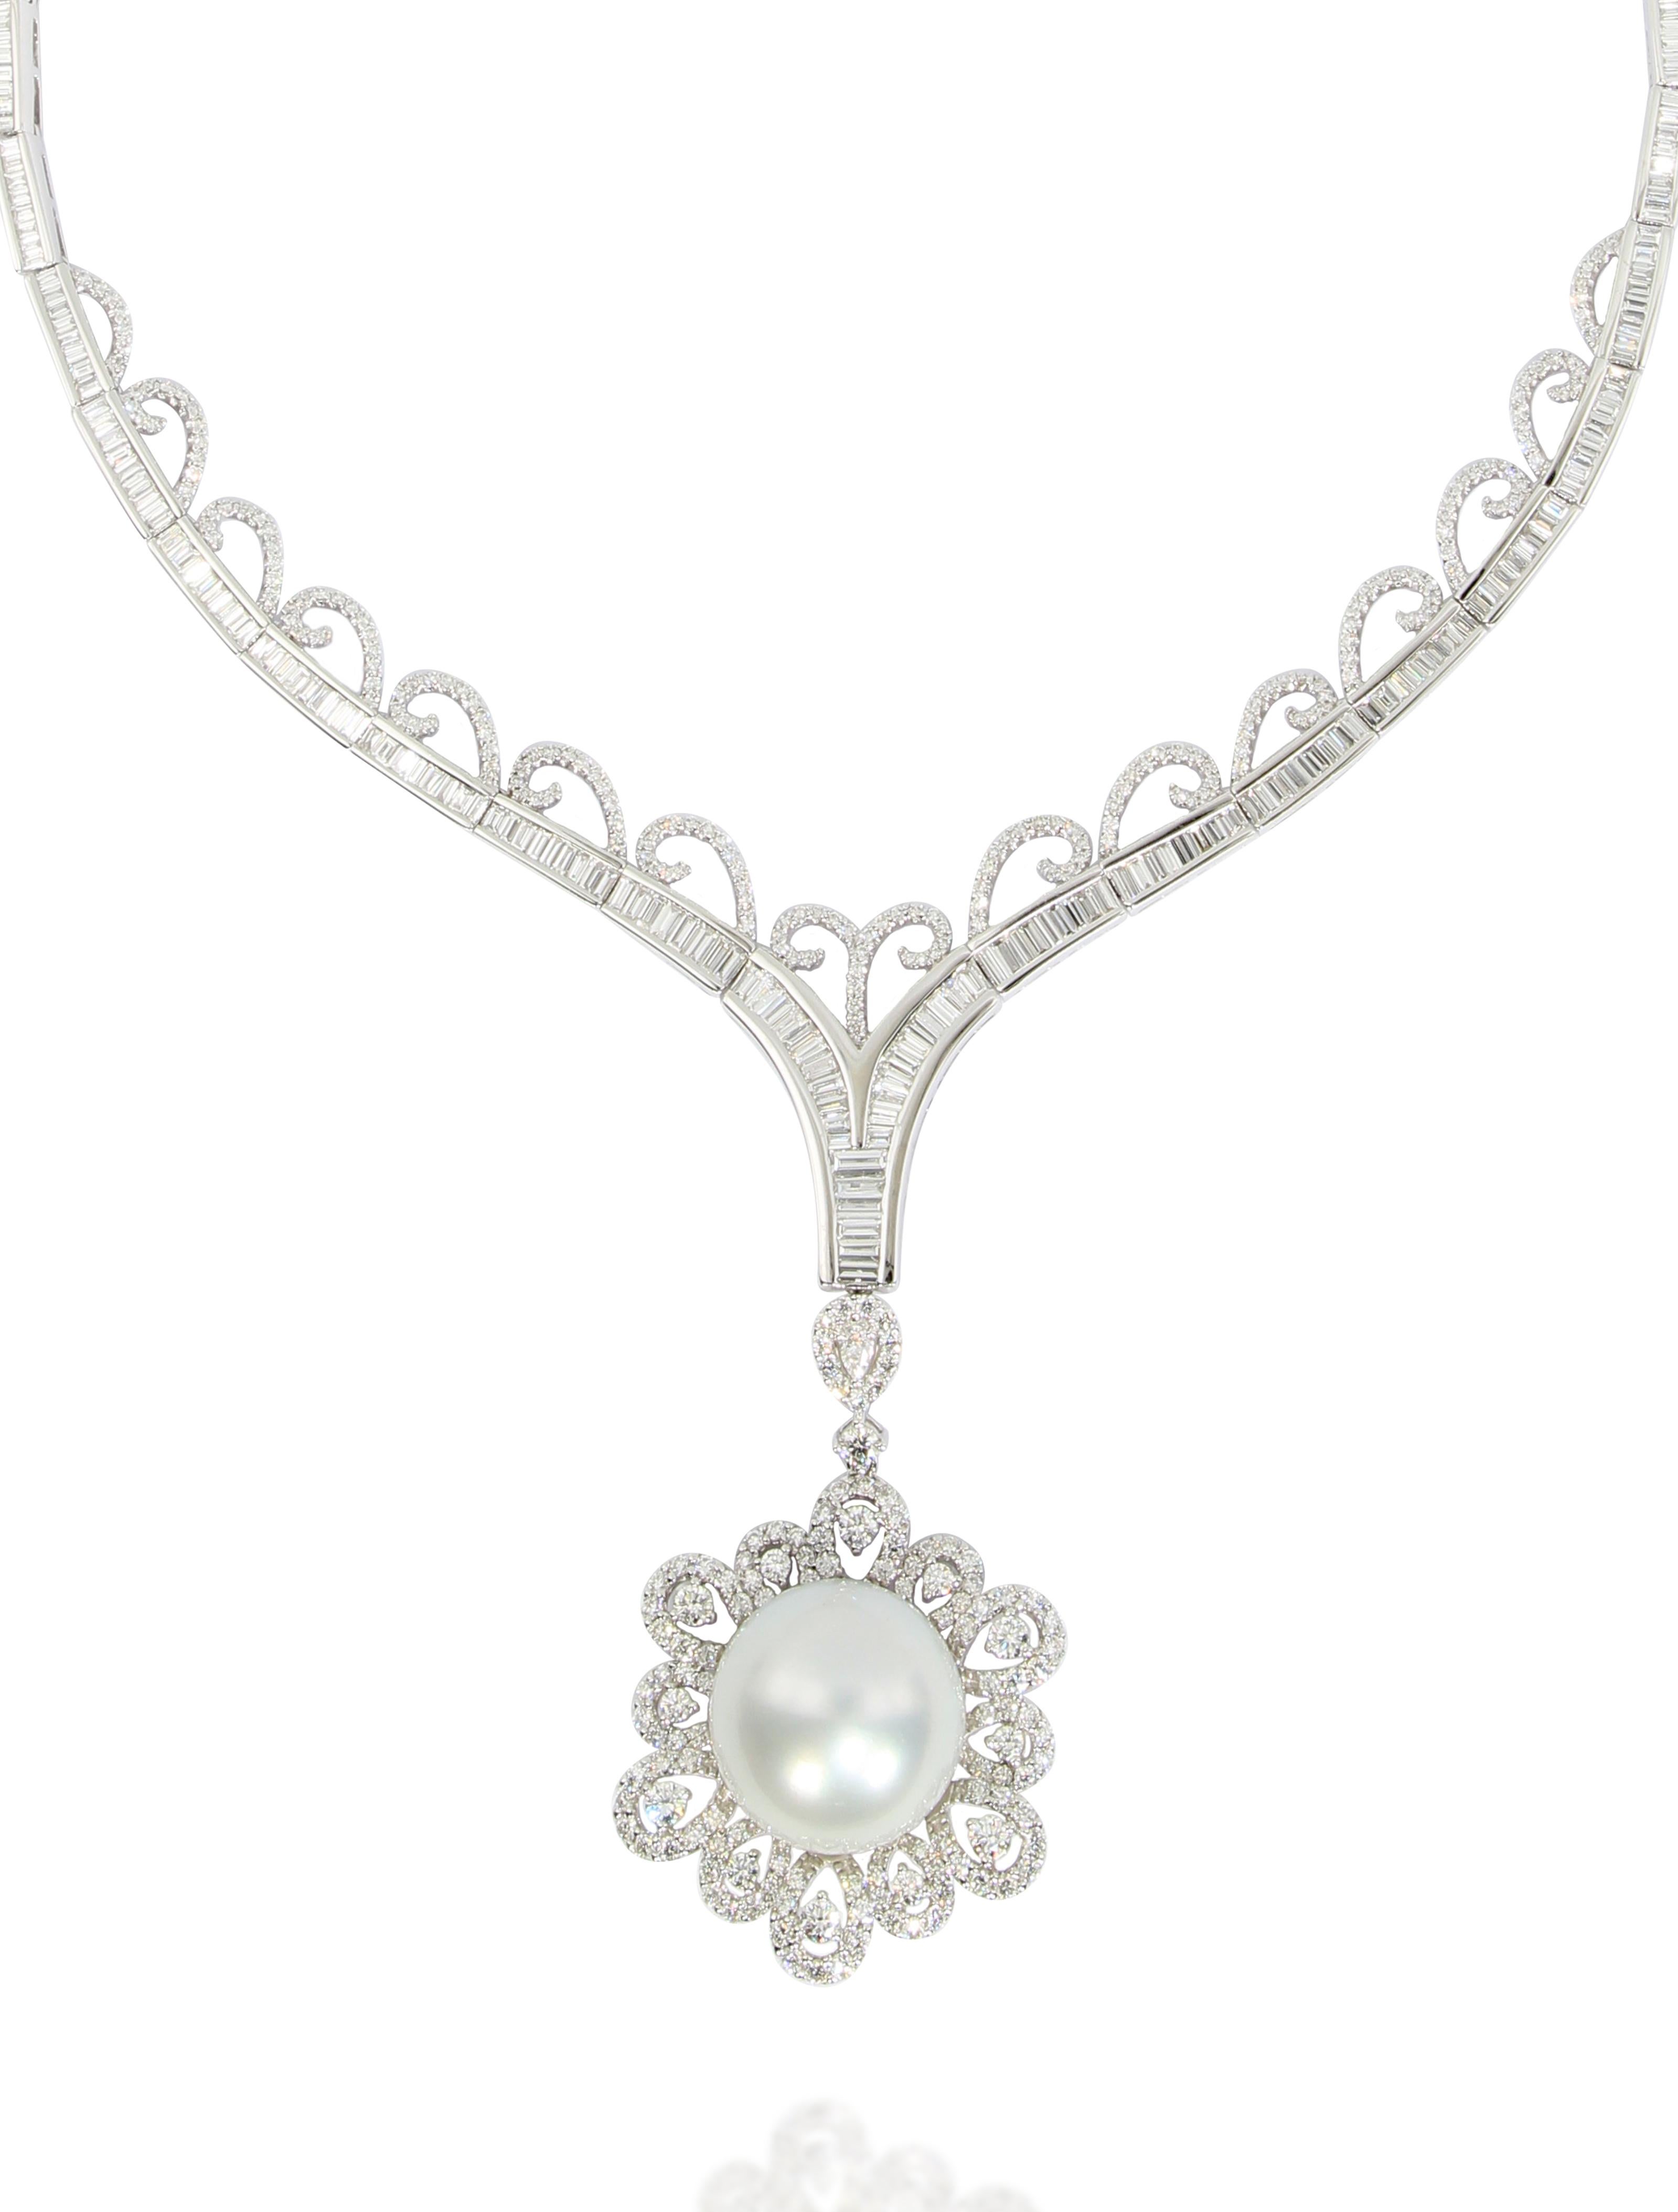 A magnificent South Sea pearl pendant set in 18 Karat white gold. This 16-16.5mm huge white south sea pearl is set in a frame composed of pear shape and round brilliant cut diamonds weighing 1.98 carats in total.  It comes with an elegent necklace